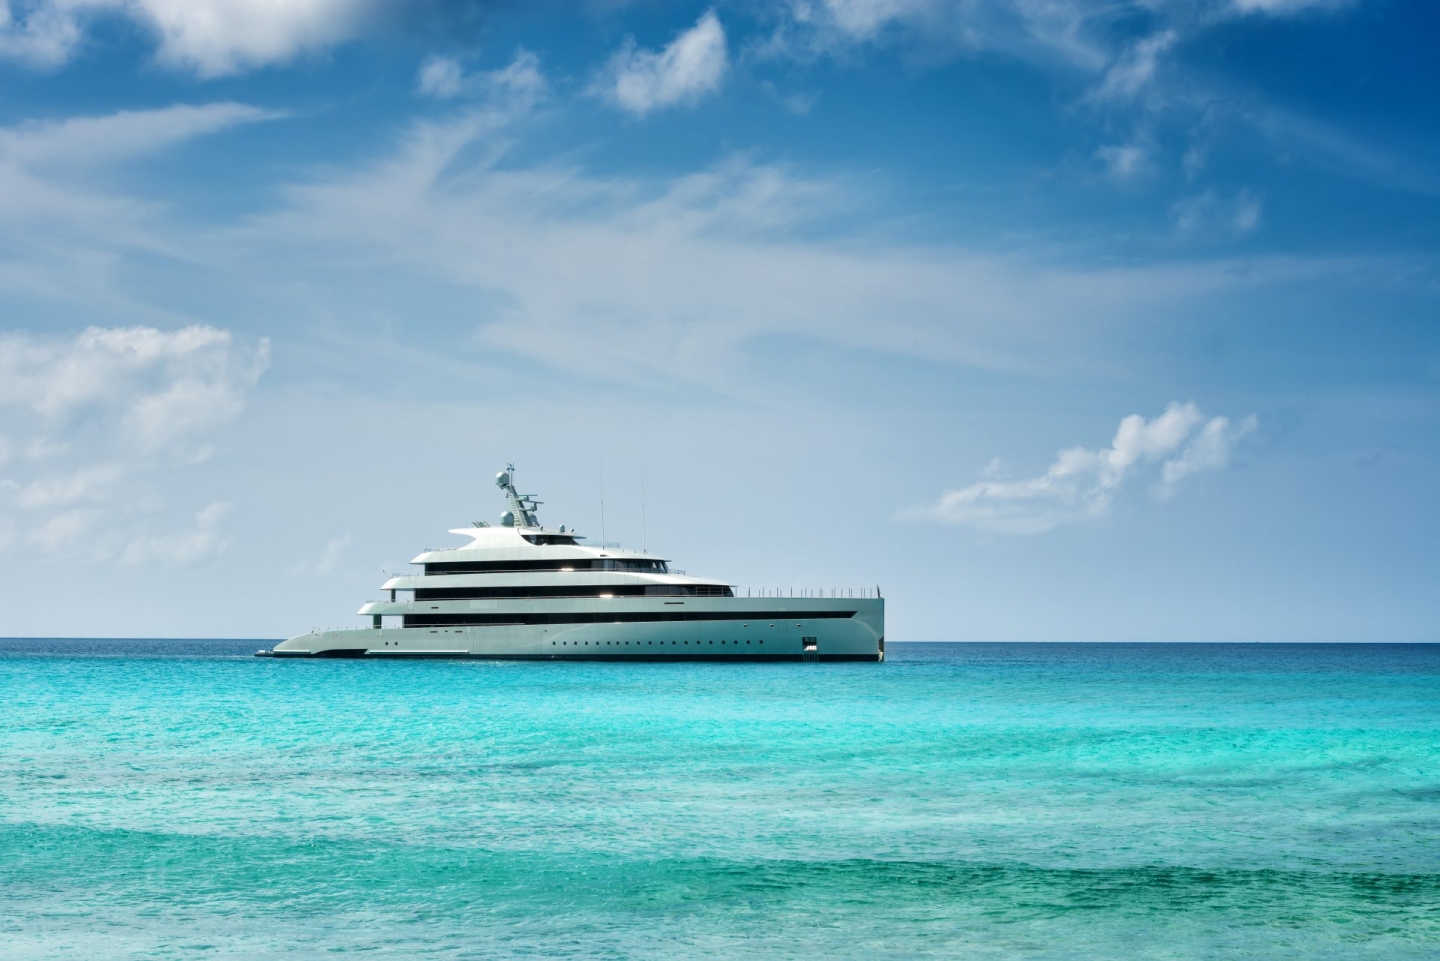 The running costs of a Superyacht – what are they really?